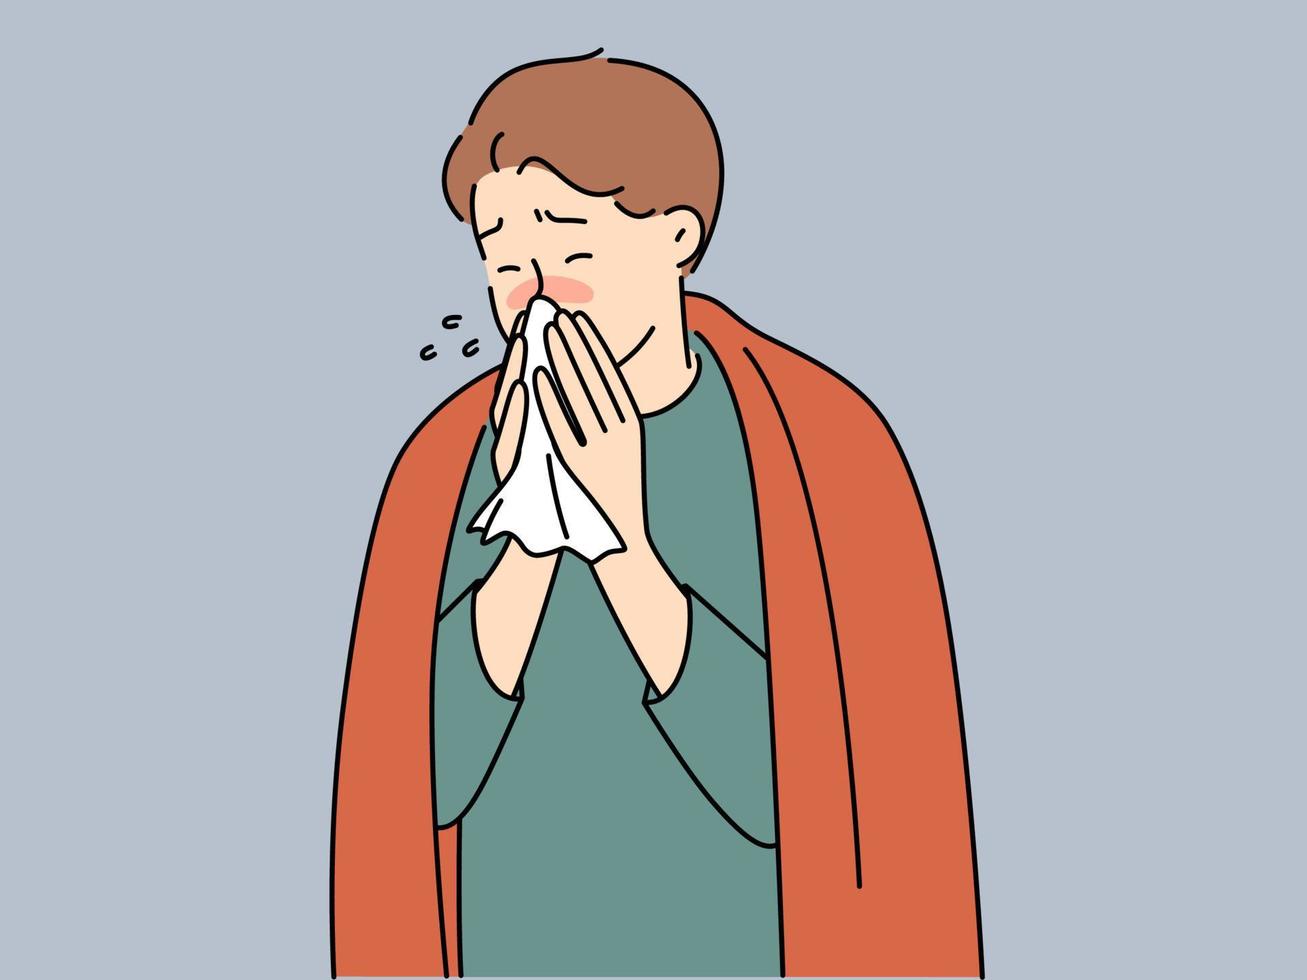 Sick young man in blanket blow runny nose suffer from cold or rhinitis. Unhealthy male struggle with flu or grippe. Healthcare and sick leave. Vector illustration.